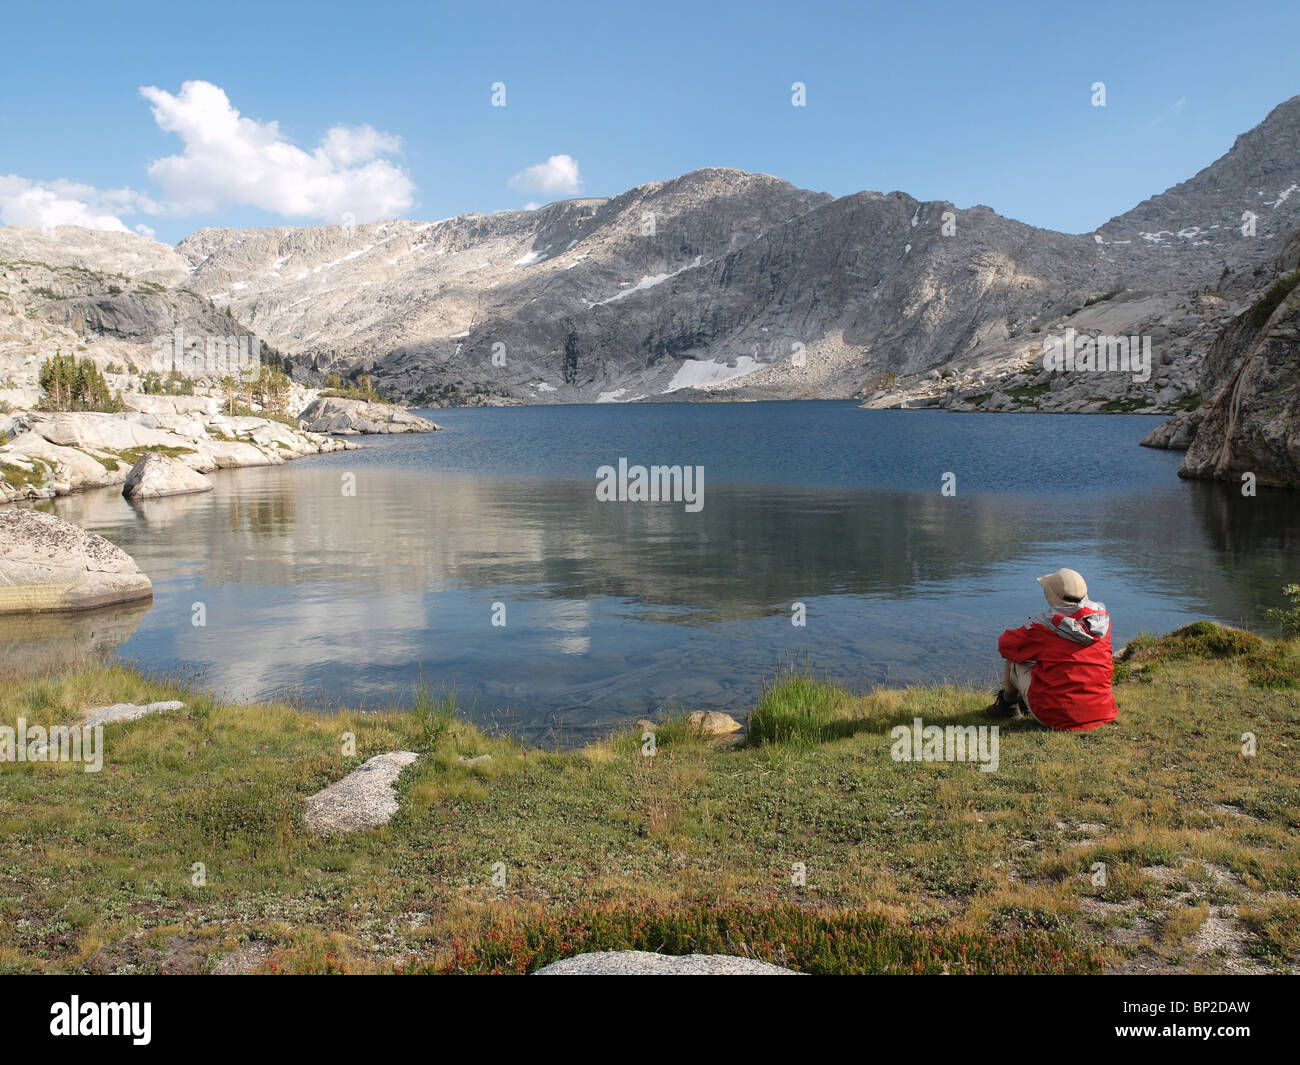 A hiker overlooks 10,568' Three Island Lake in the John Muir Wilderness of the Sierra National Forest. Stock Photo